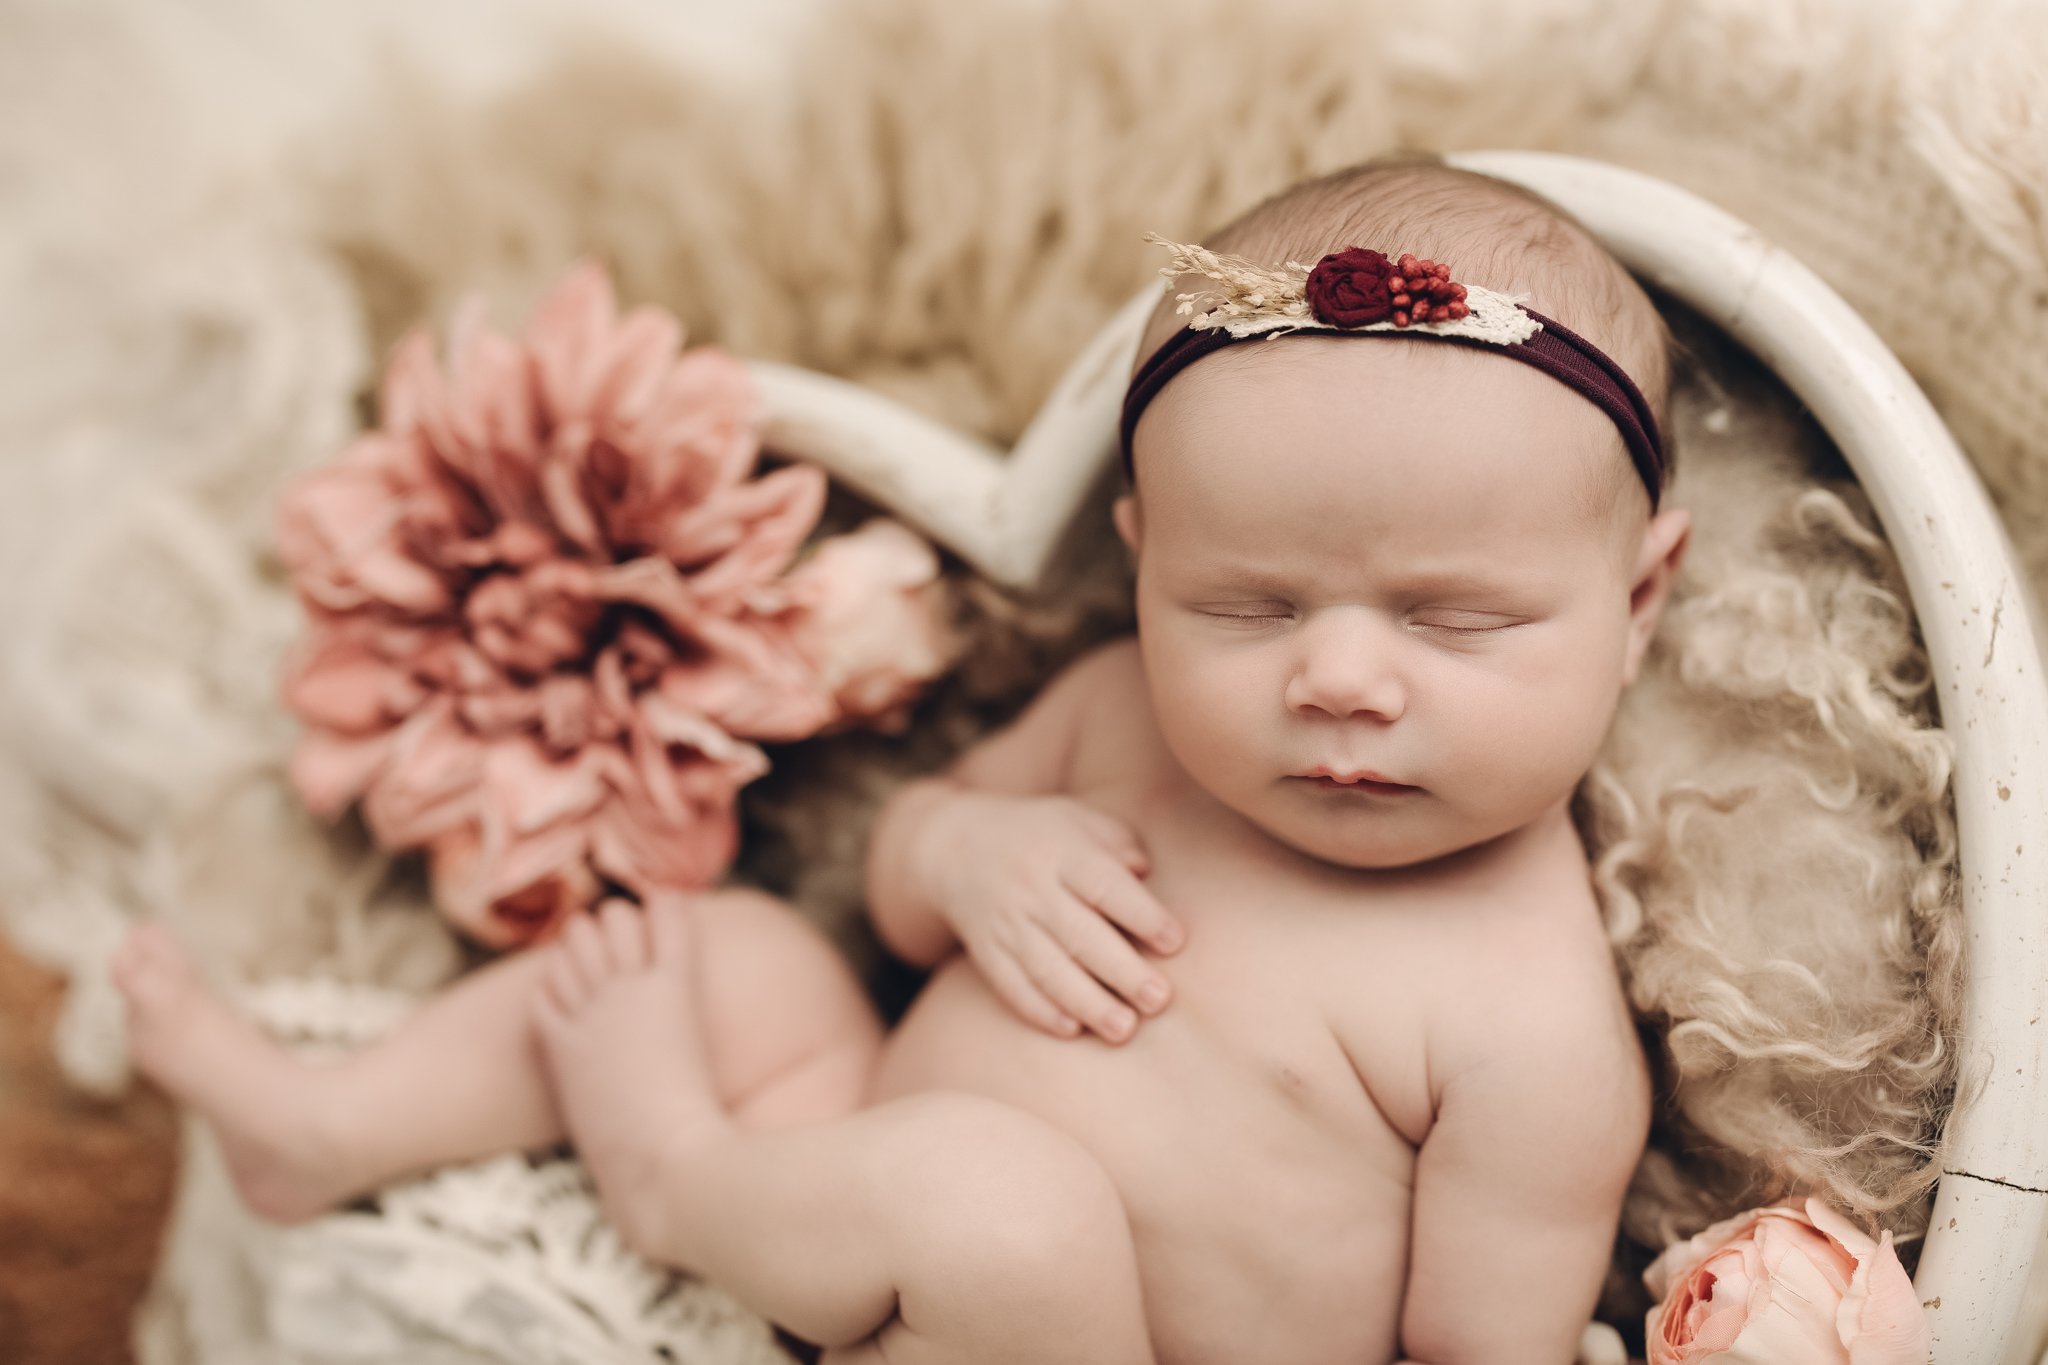 Cute Baby Girl from Asia Pose Stock Photo - Image of girl, newborn:  131245724